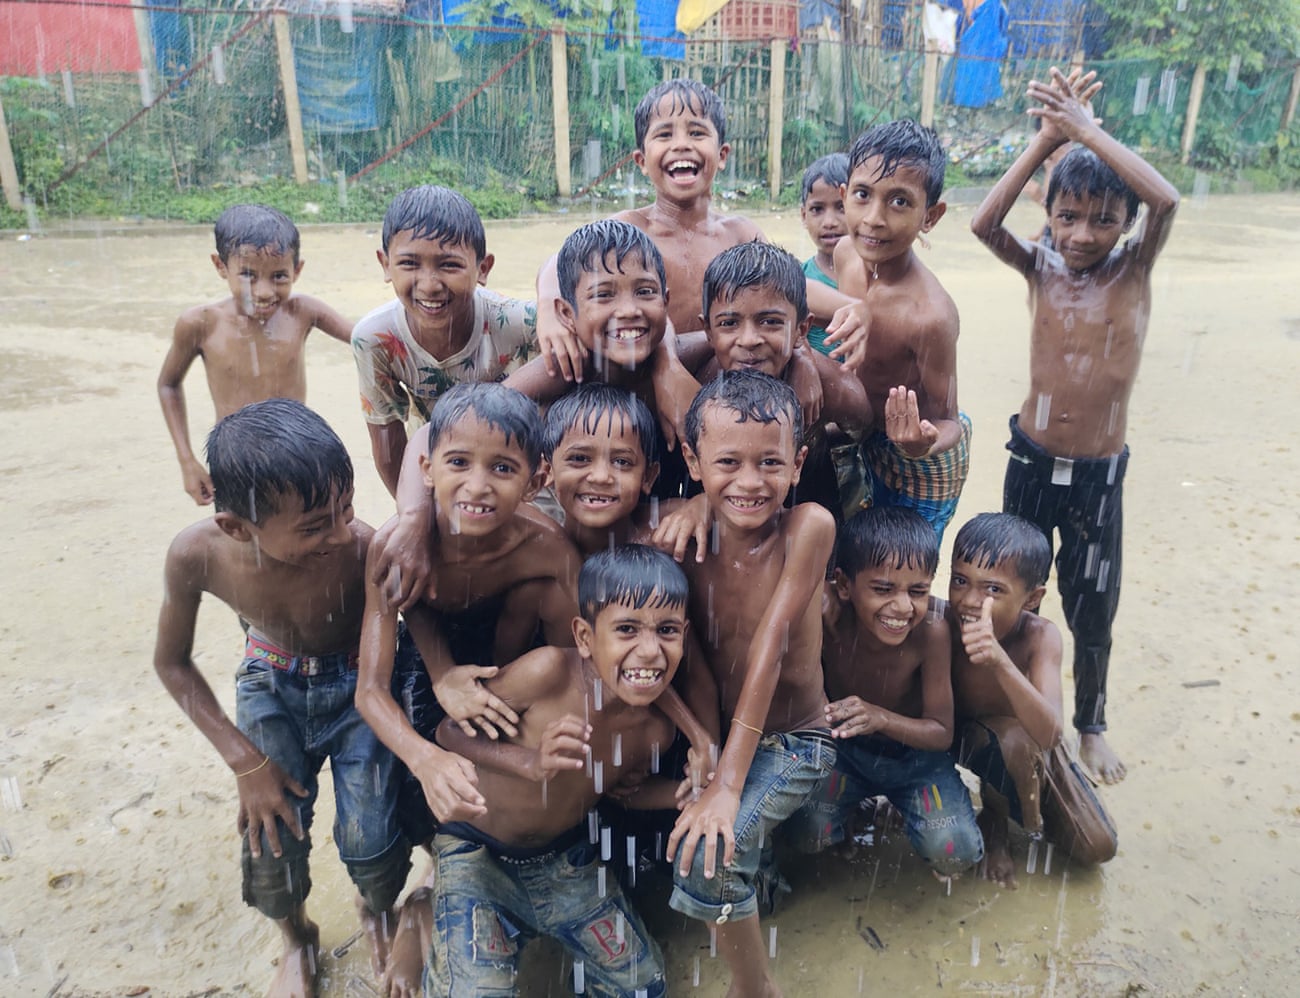 A group of Rohingya children play in the rain as it pours down outside their shelters in the refugee camps of Cox’s Bazar, Bangladesh.